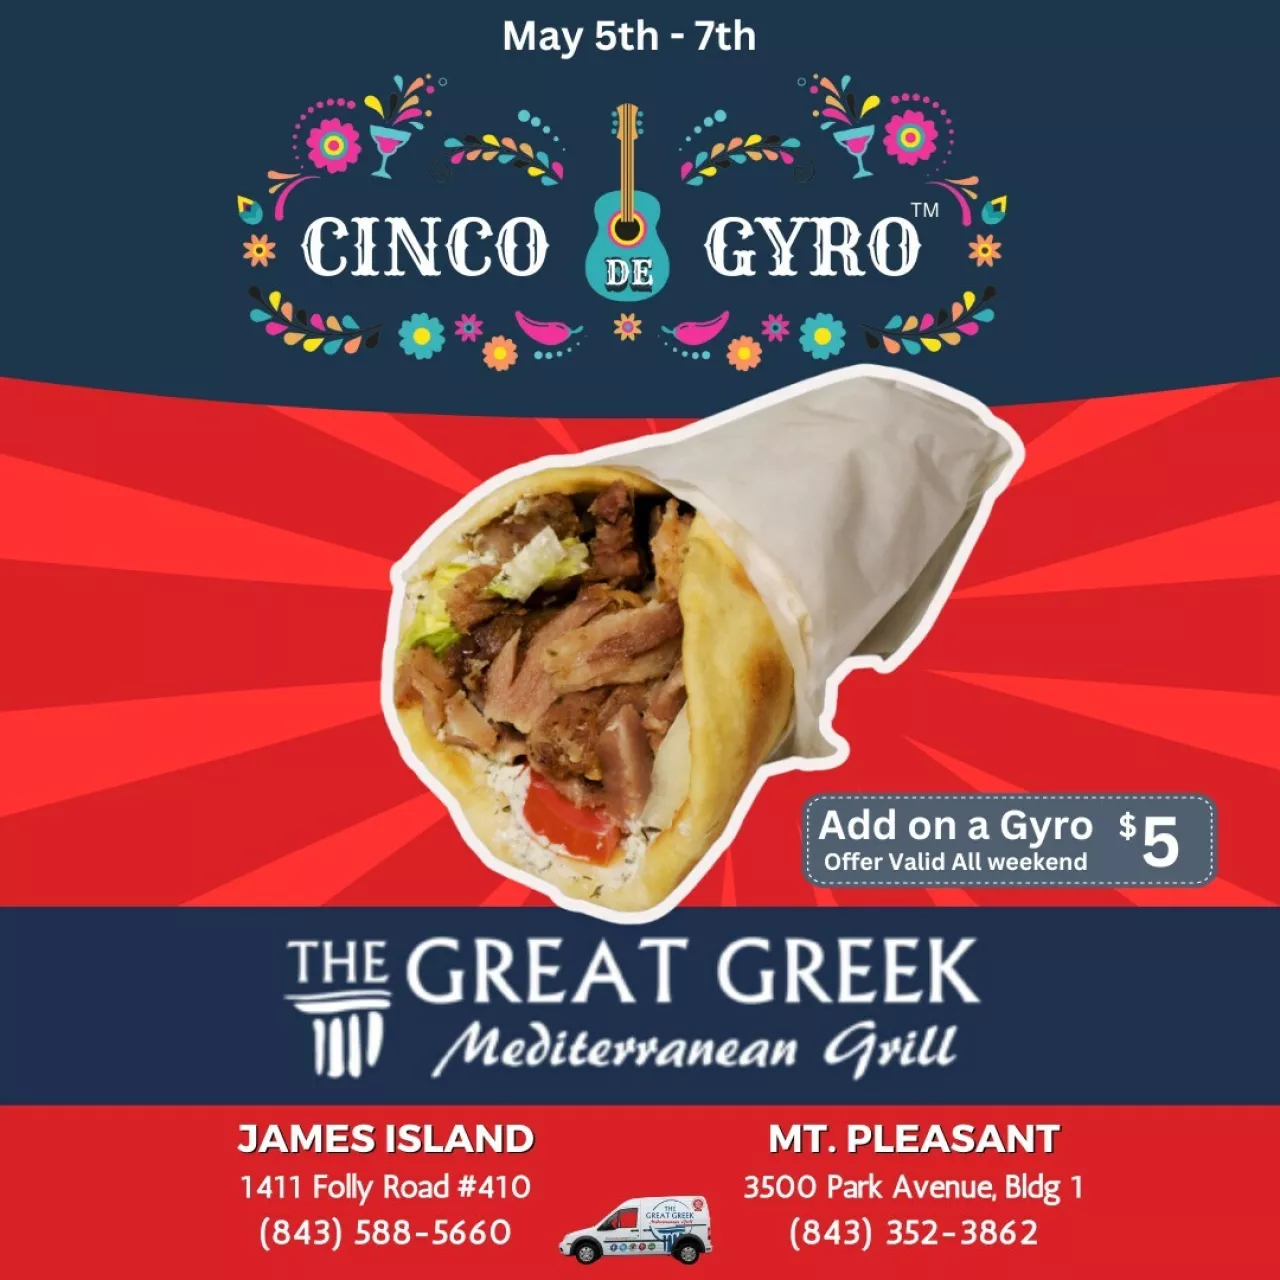 This Cinco de Gyro™ promotion is available all weekend, starting on Friday, May 5th, and ending on Sunday, May 7th. Don't miss out on this incredible deal - it's too good to pass up! Visit us at our James Island or Mt. Pleasant location and treat yourself to some of the best Greek food in town. img#1